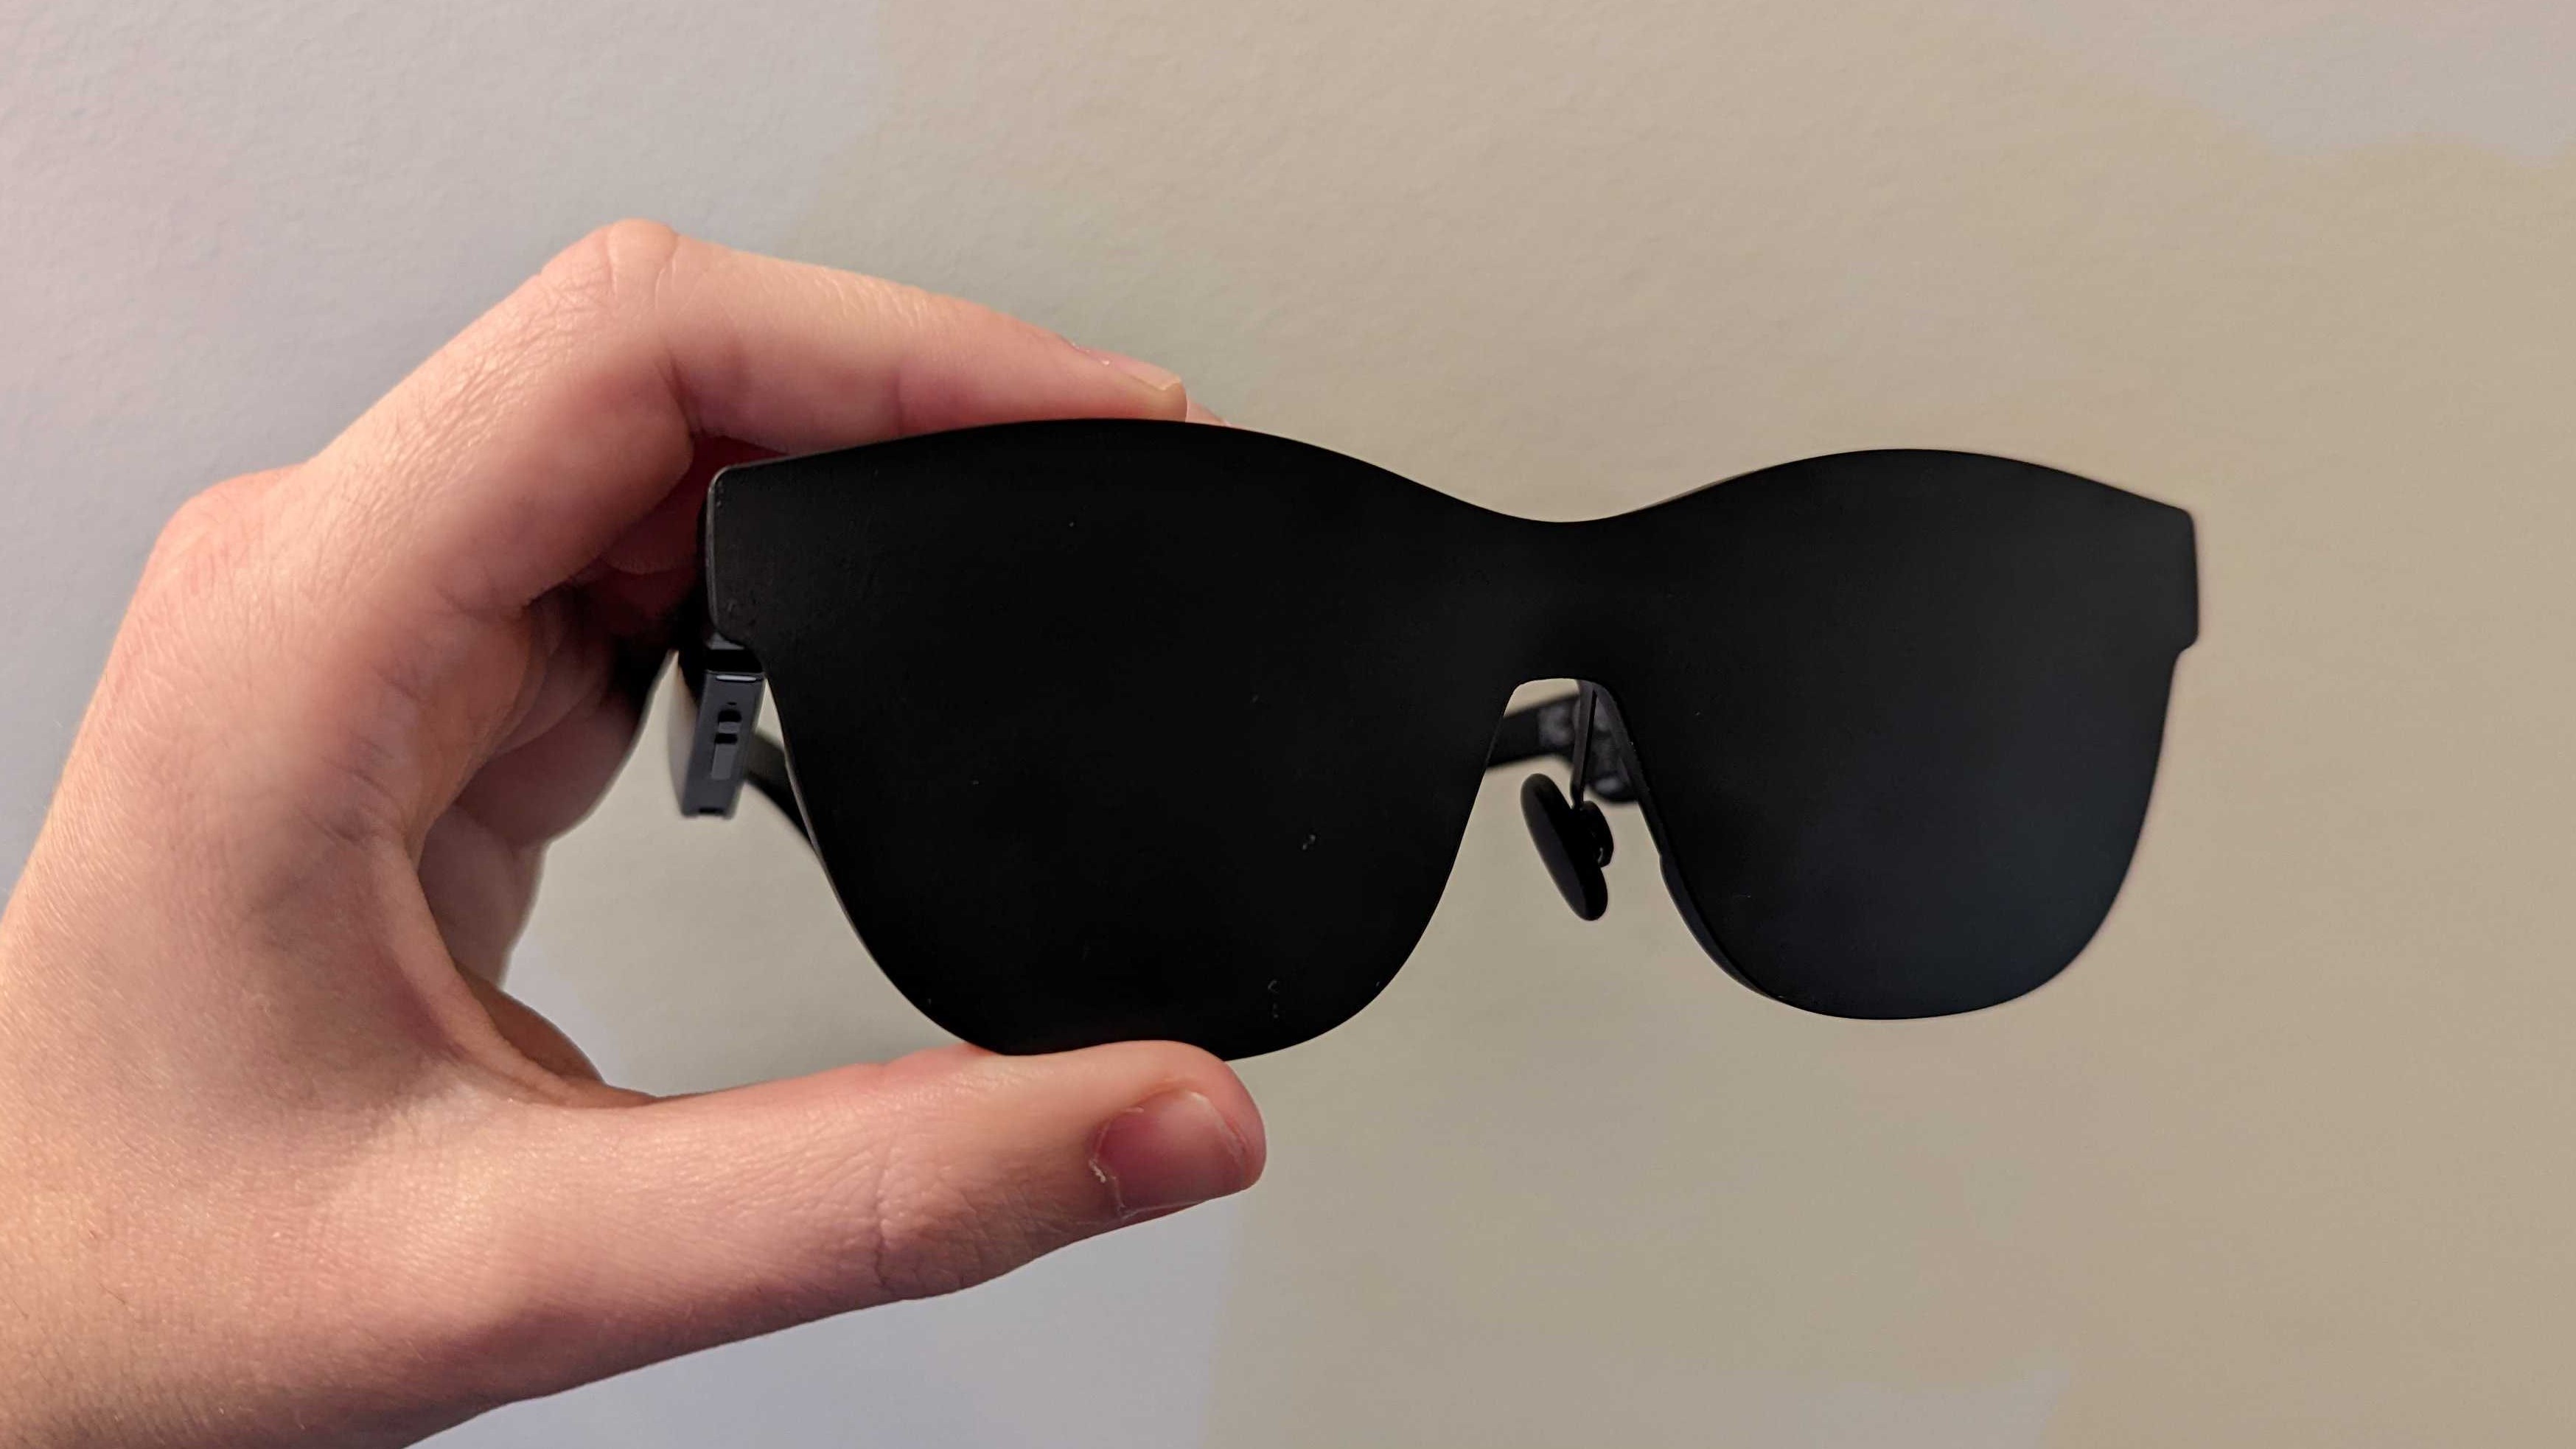 The Nreal Air AR Glasses with the visor clipped on